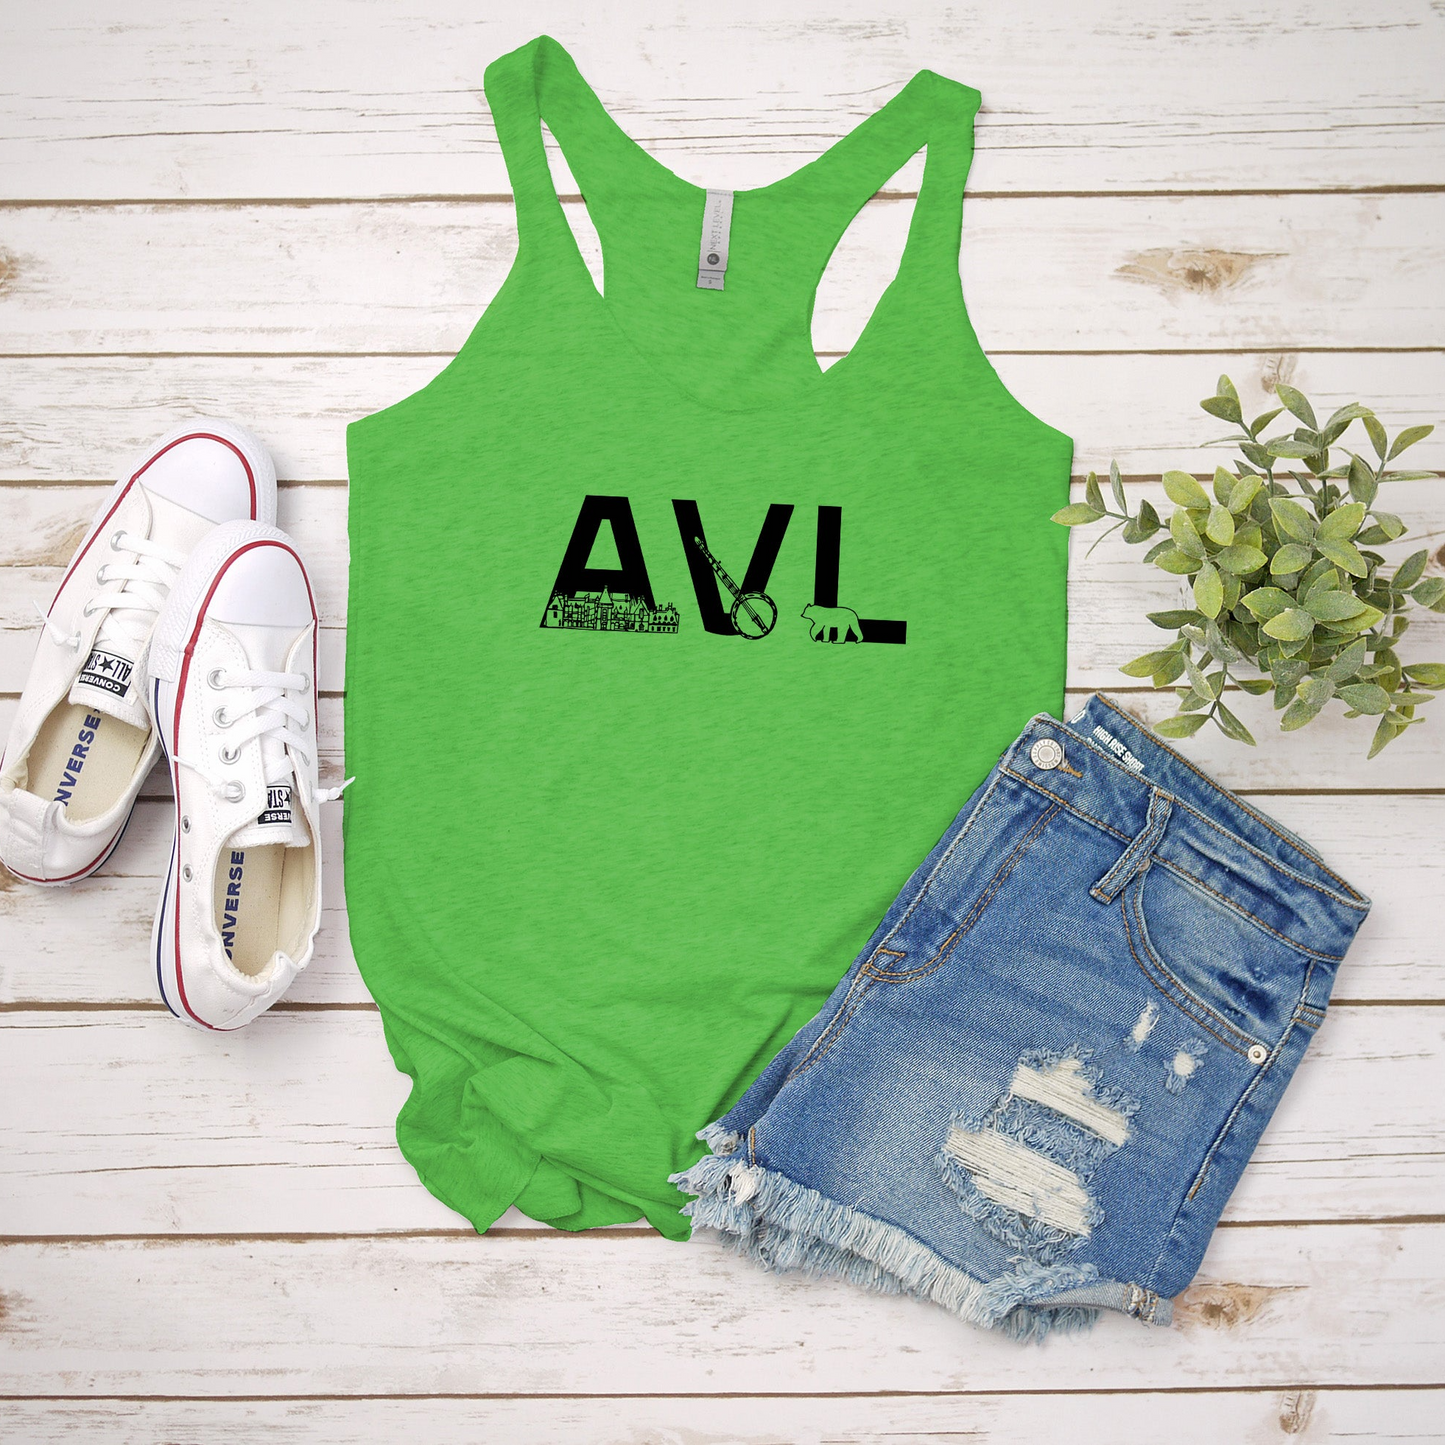 a green tank top with the word avl on it next to a pair of